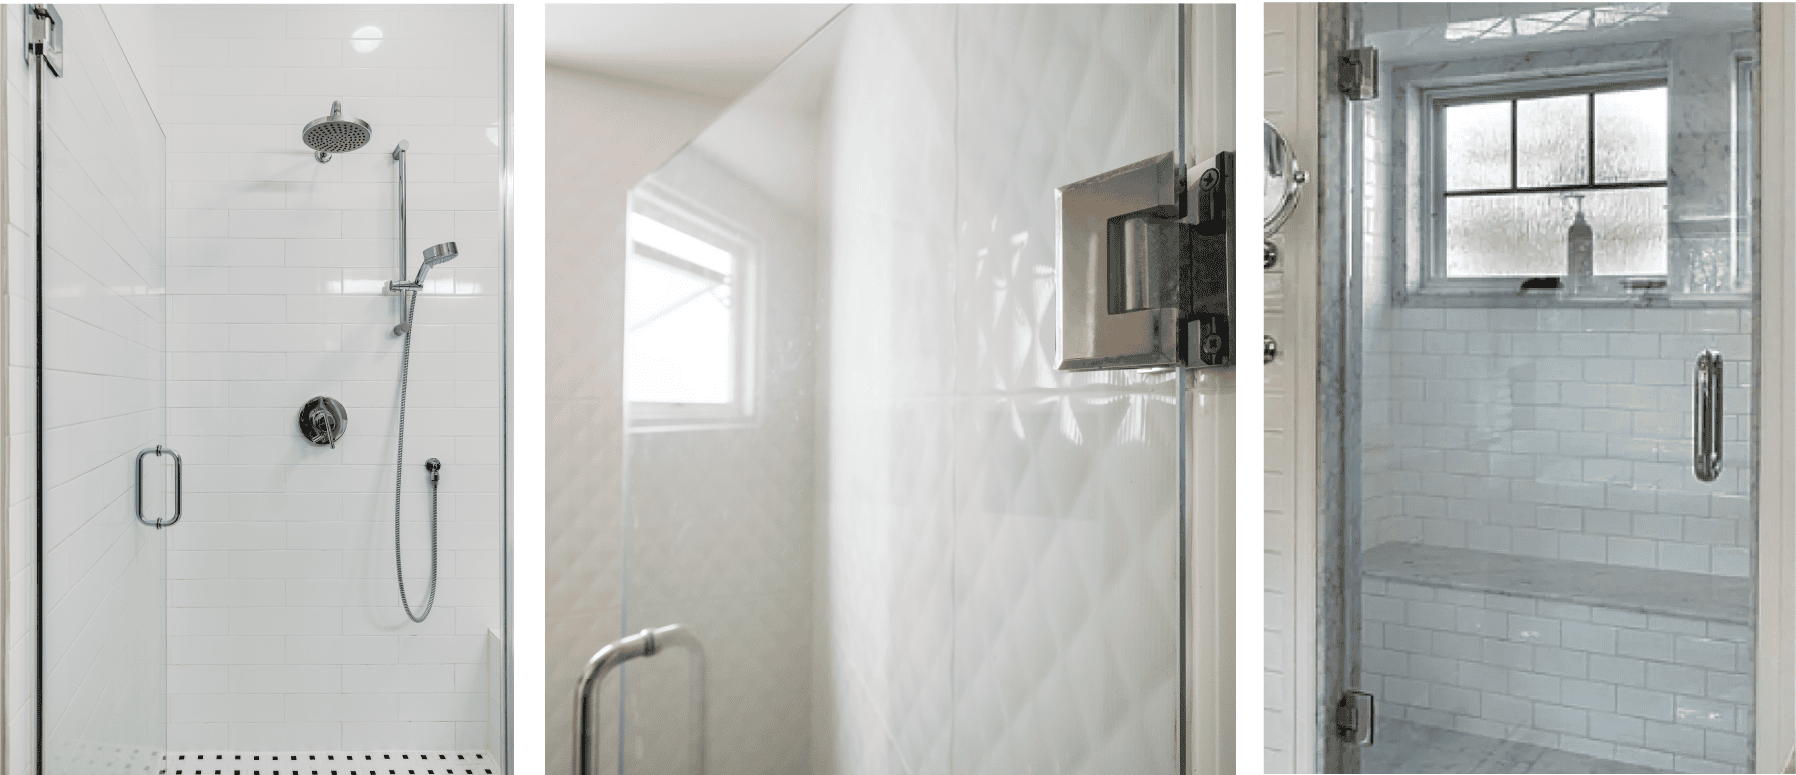 A collection of pictures featuring showers with single glass doors and hardware.